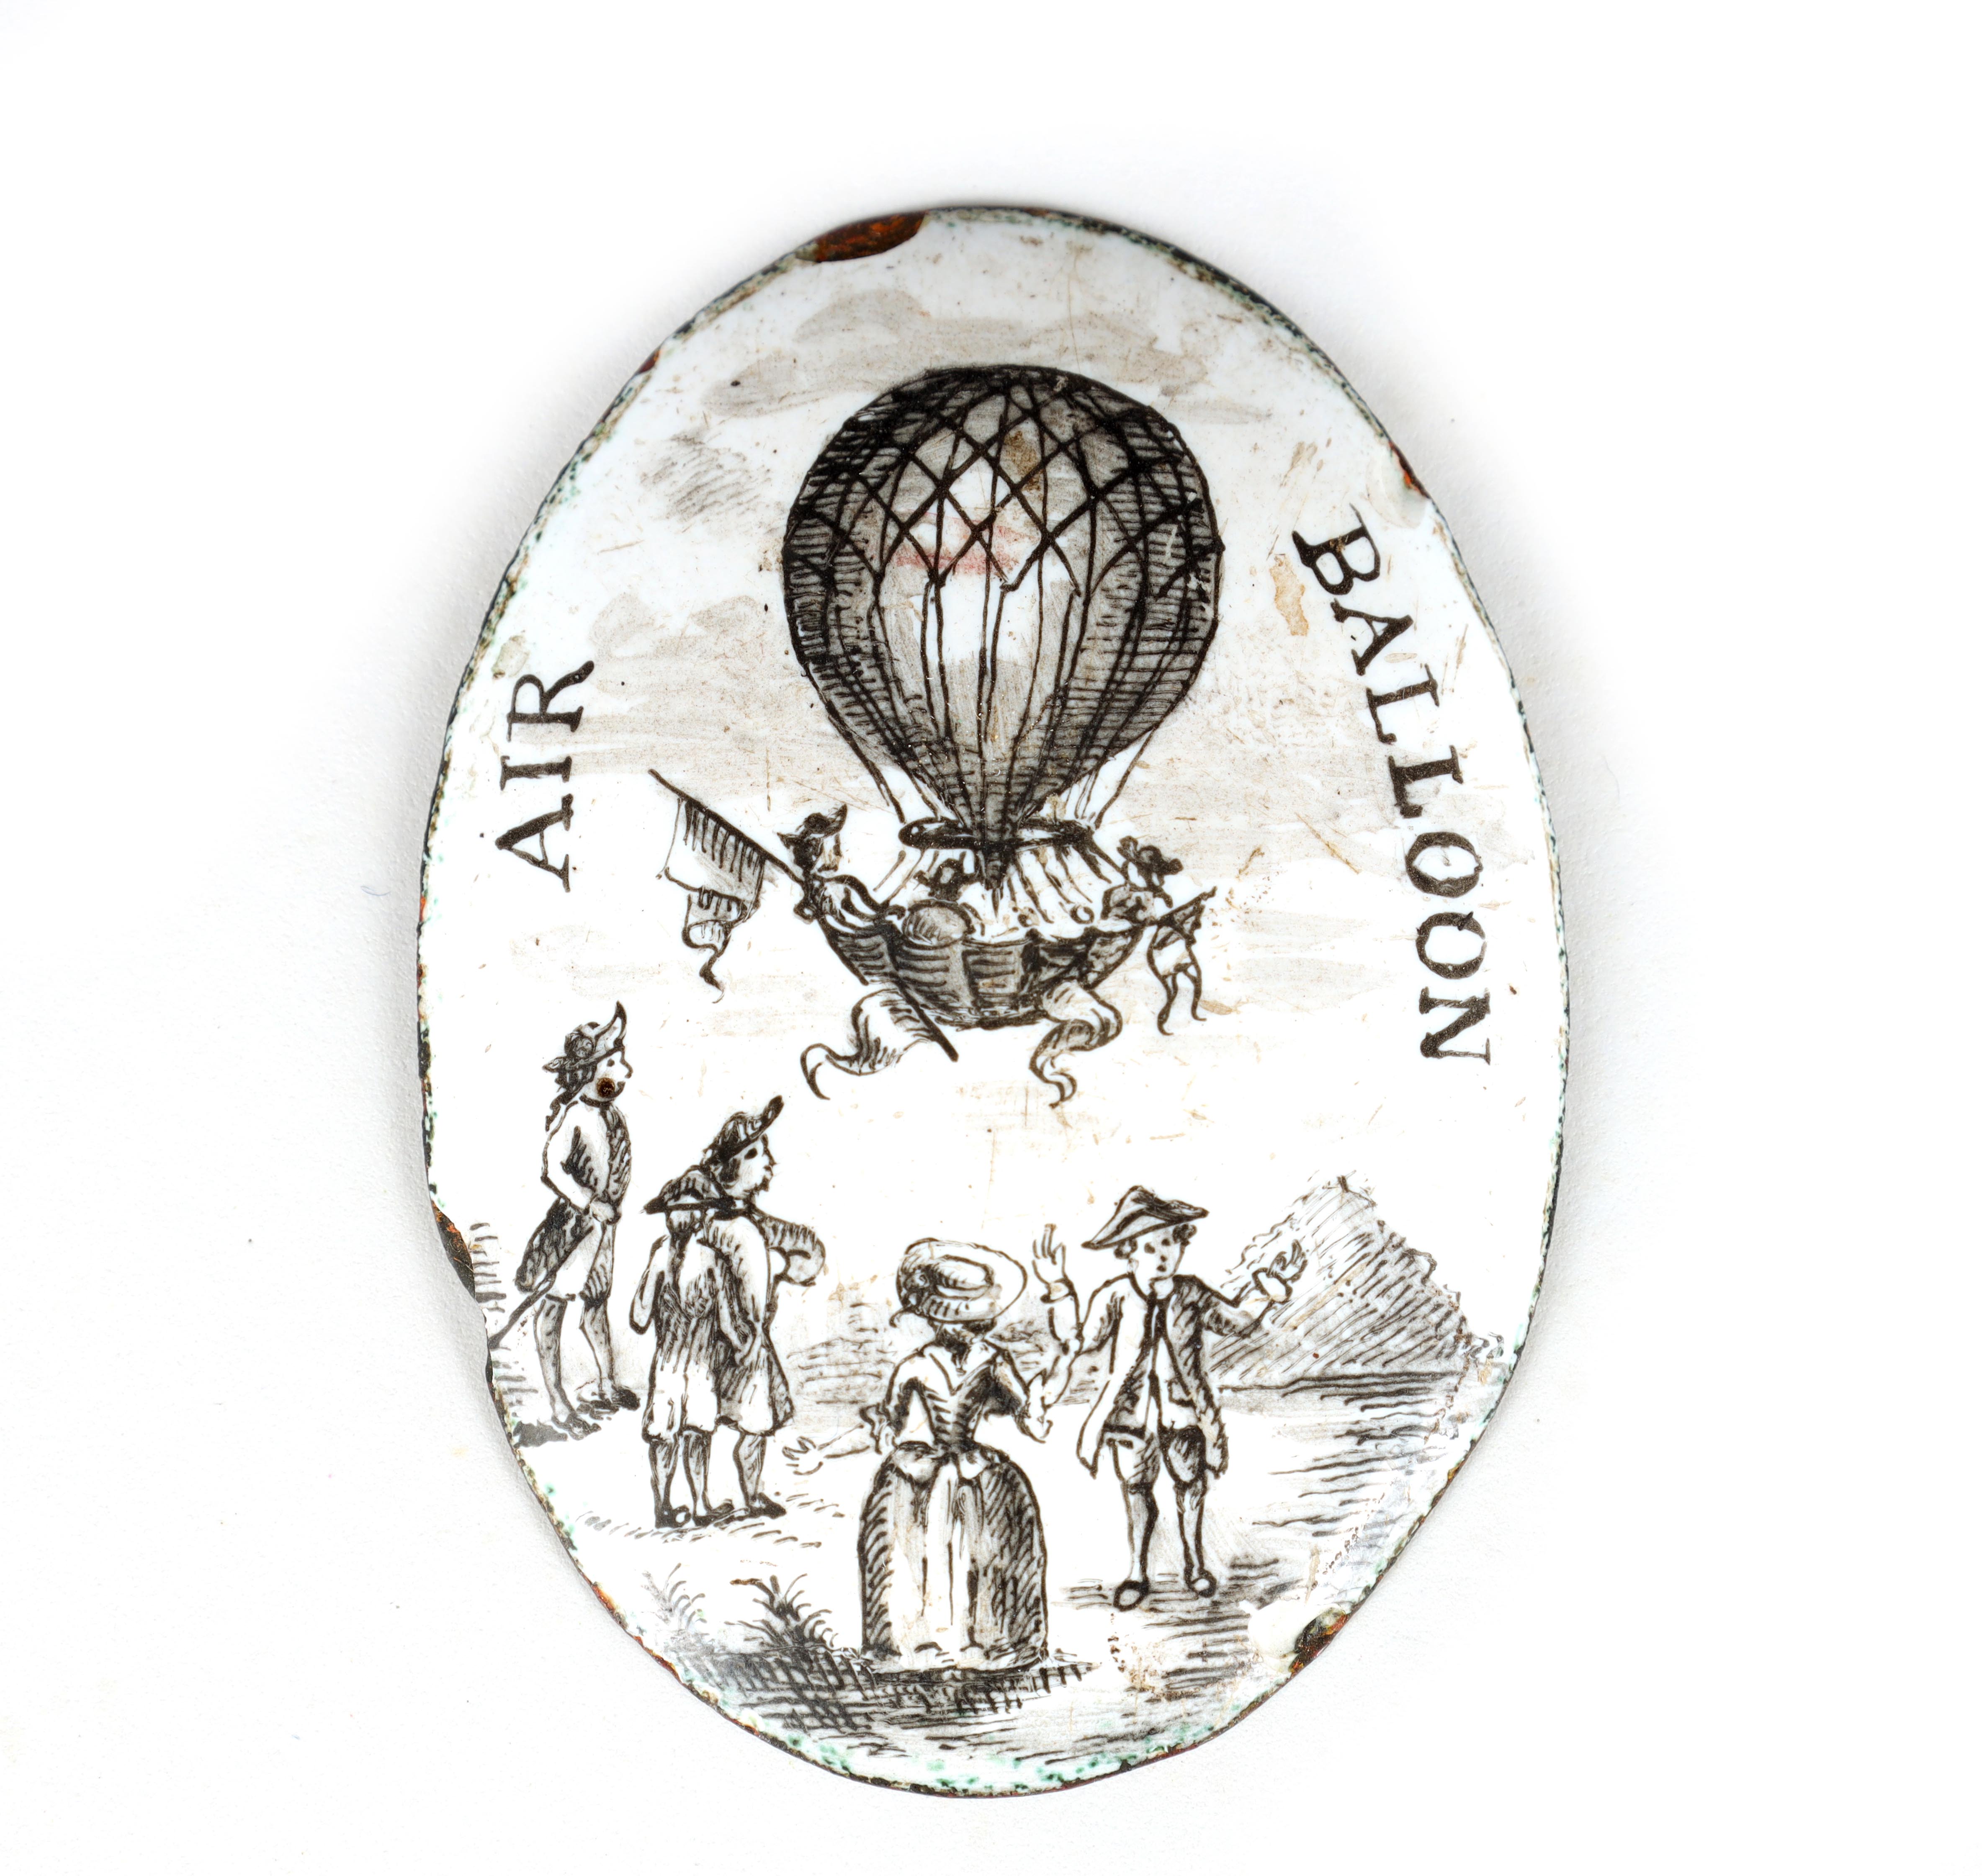 A RARE 18TH CENTURY BATTERSEA ENAMEL ON COPPER OVAL BADGE DEPICITING AN AIR BALLOONING SCENE 4.5cm